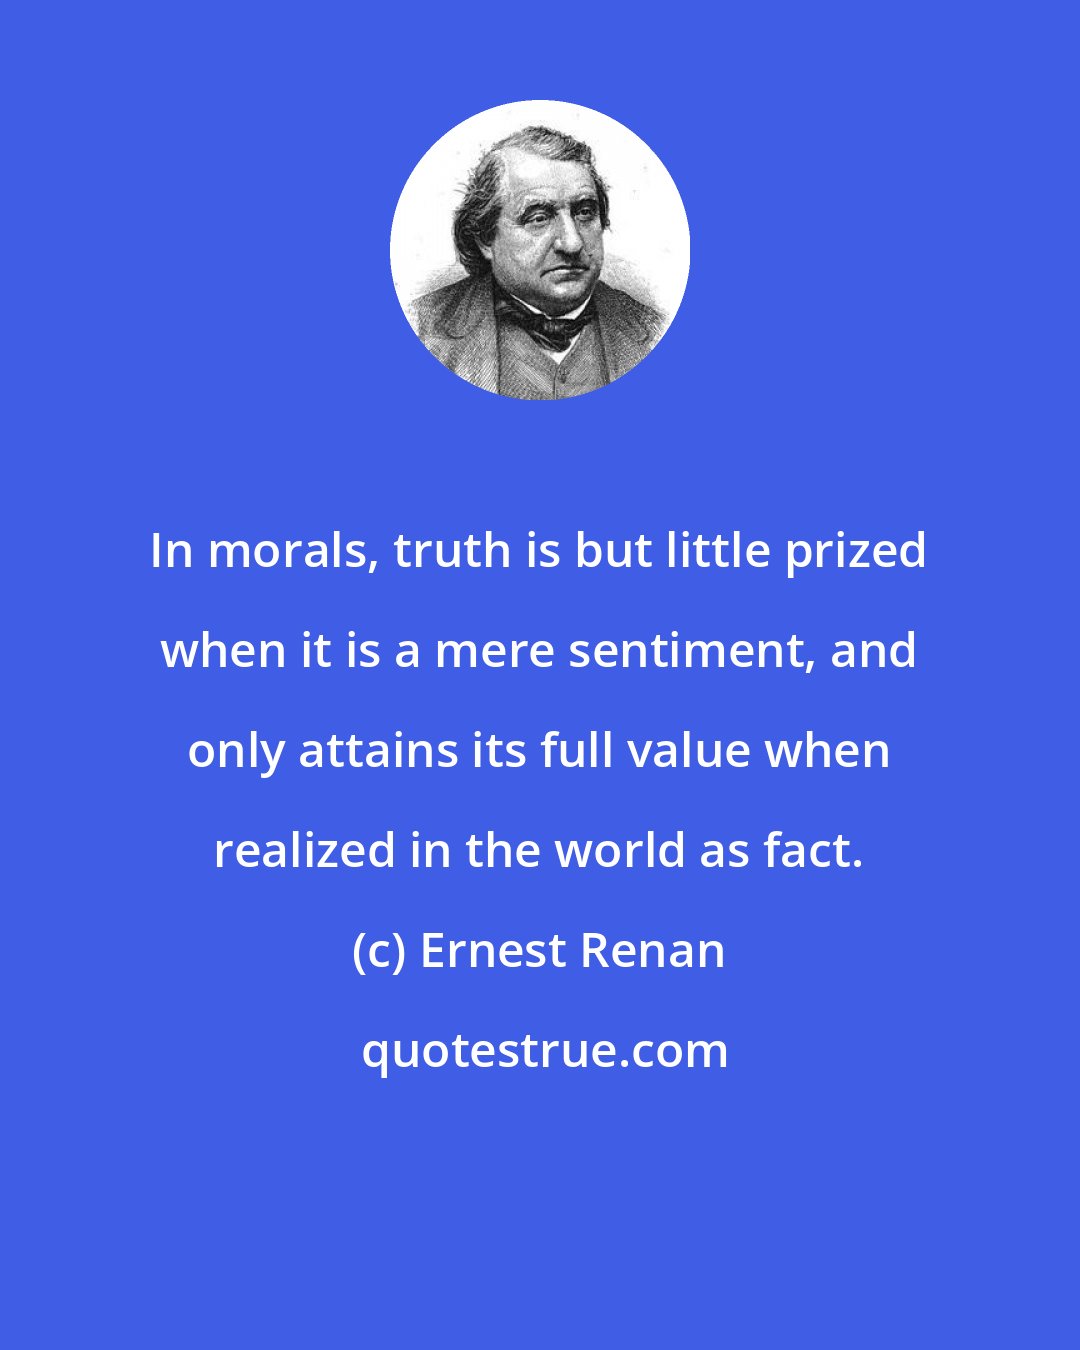 Ernest Renan: In morals, truth is but little prized when it is a mere sentiment, and only attains its full value when realized in the world as fact.